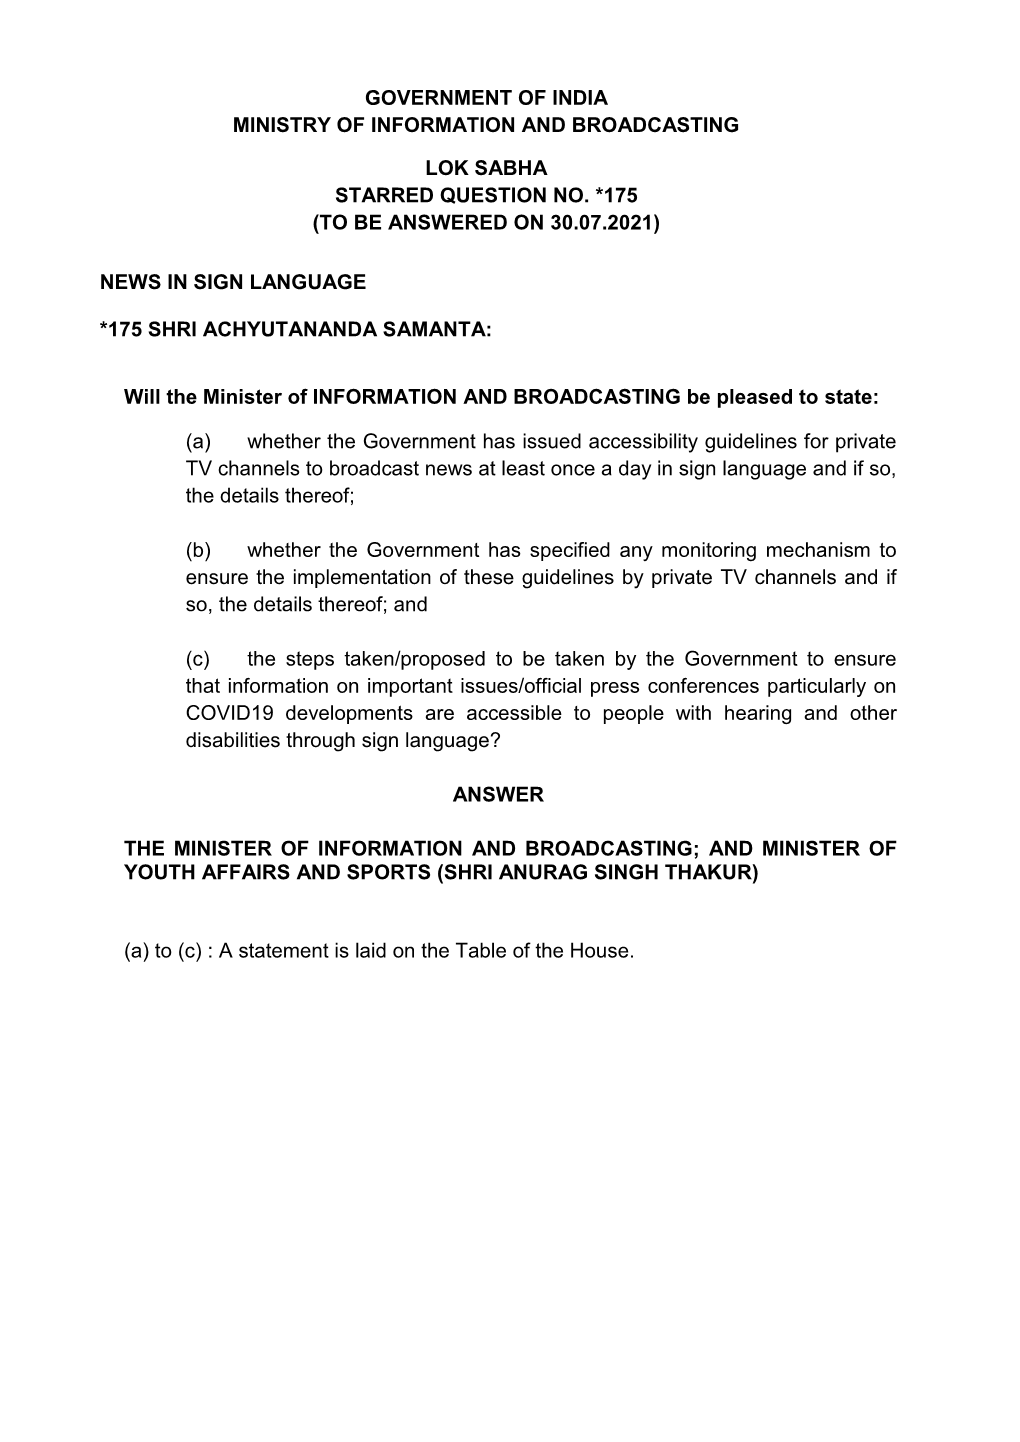 Government of India Ministry of Information and Broadcasting